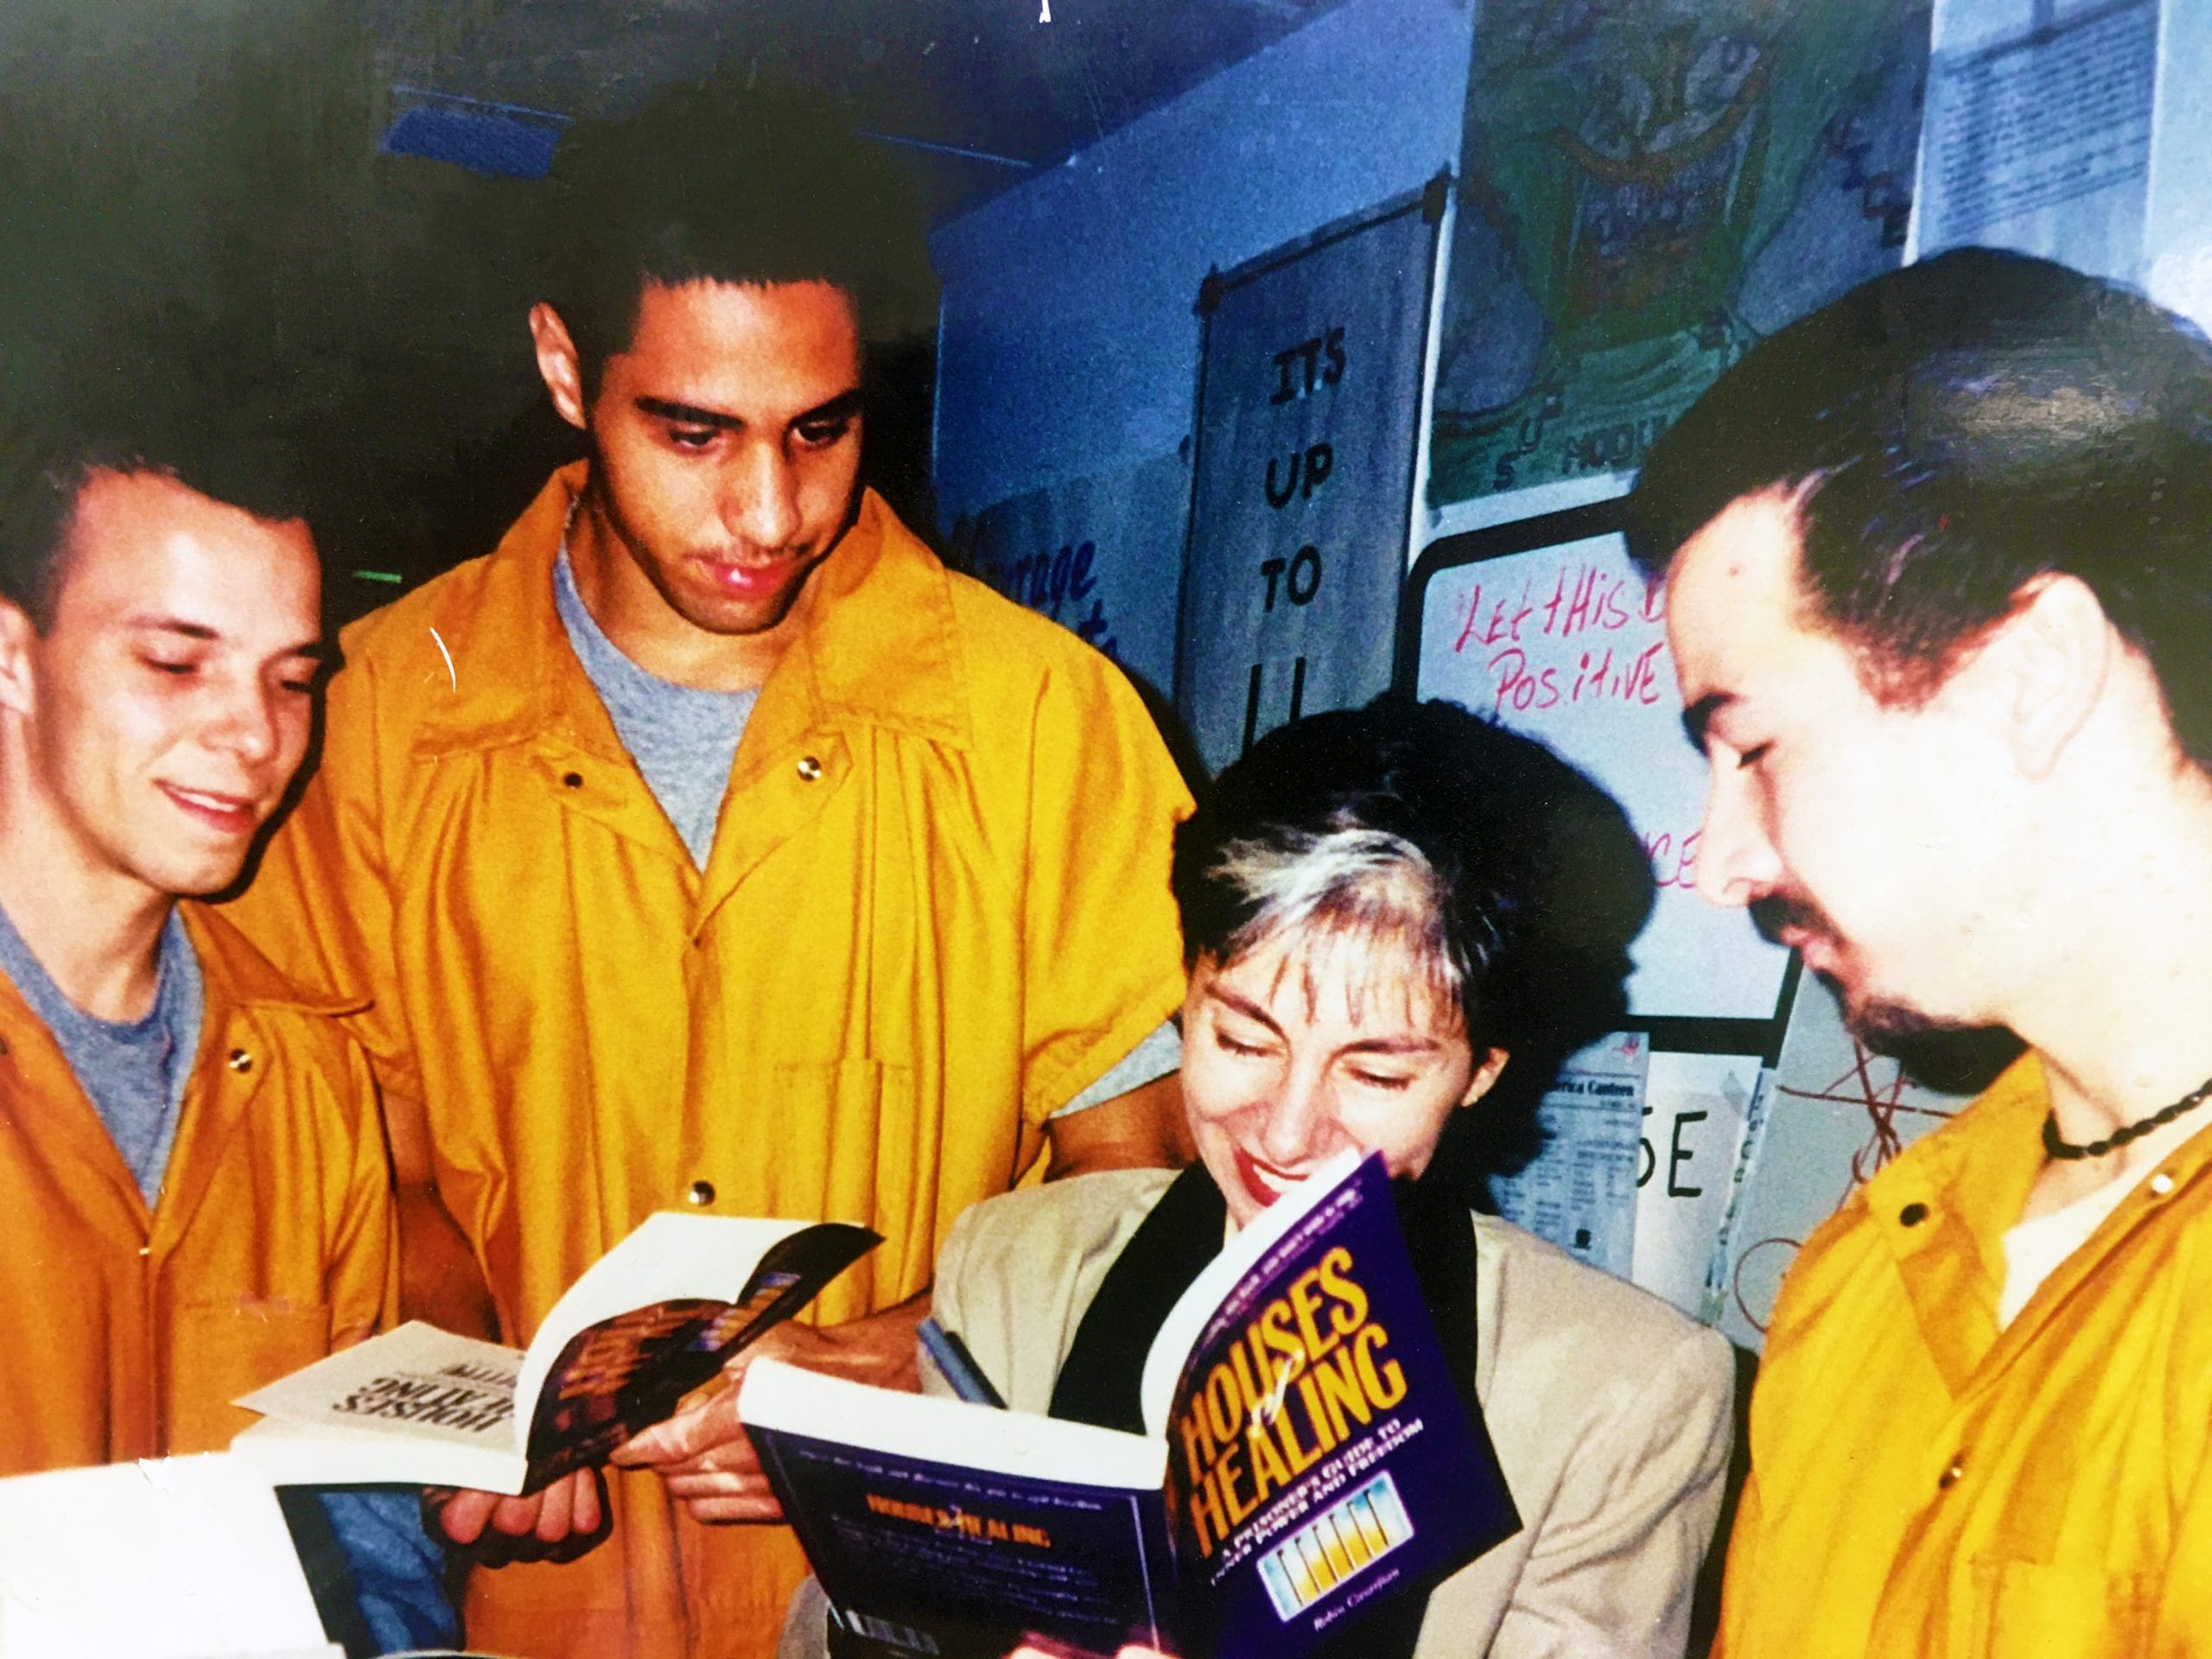 The Lionheart Foundation 's Founder and author of the program signing the Houses of Healing book for participants in our prison rehabilitation program.